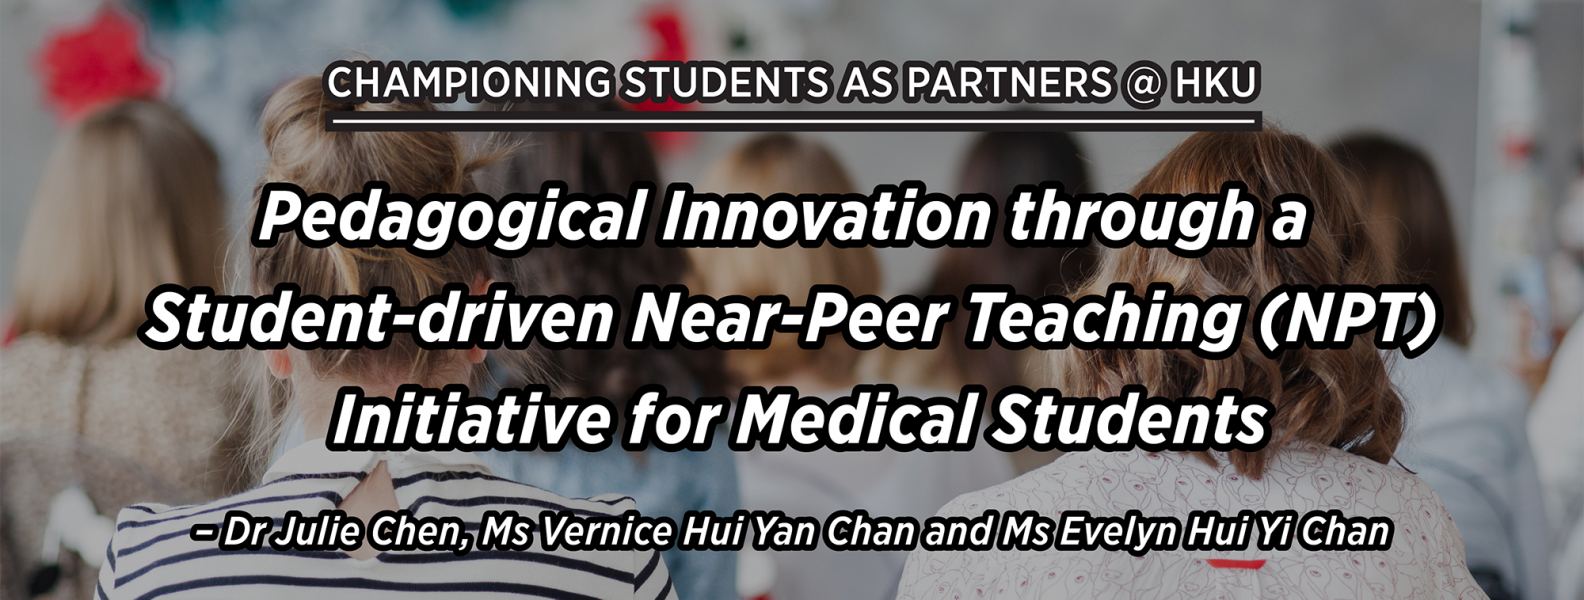 Pedagogical Innovation through a Student driven Near-Peer Teaching (NPT) Initiative for Medical Students